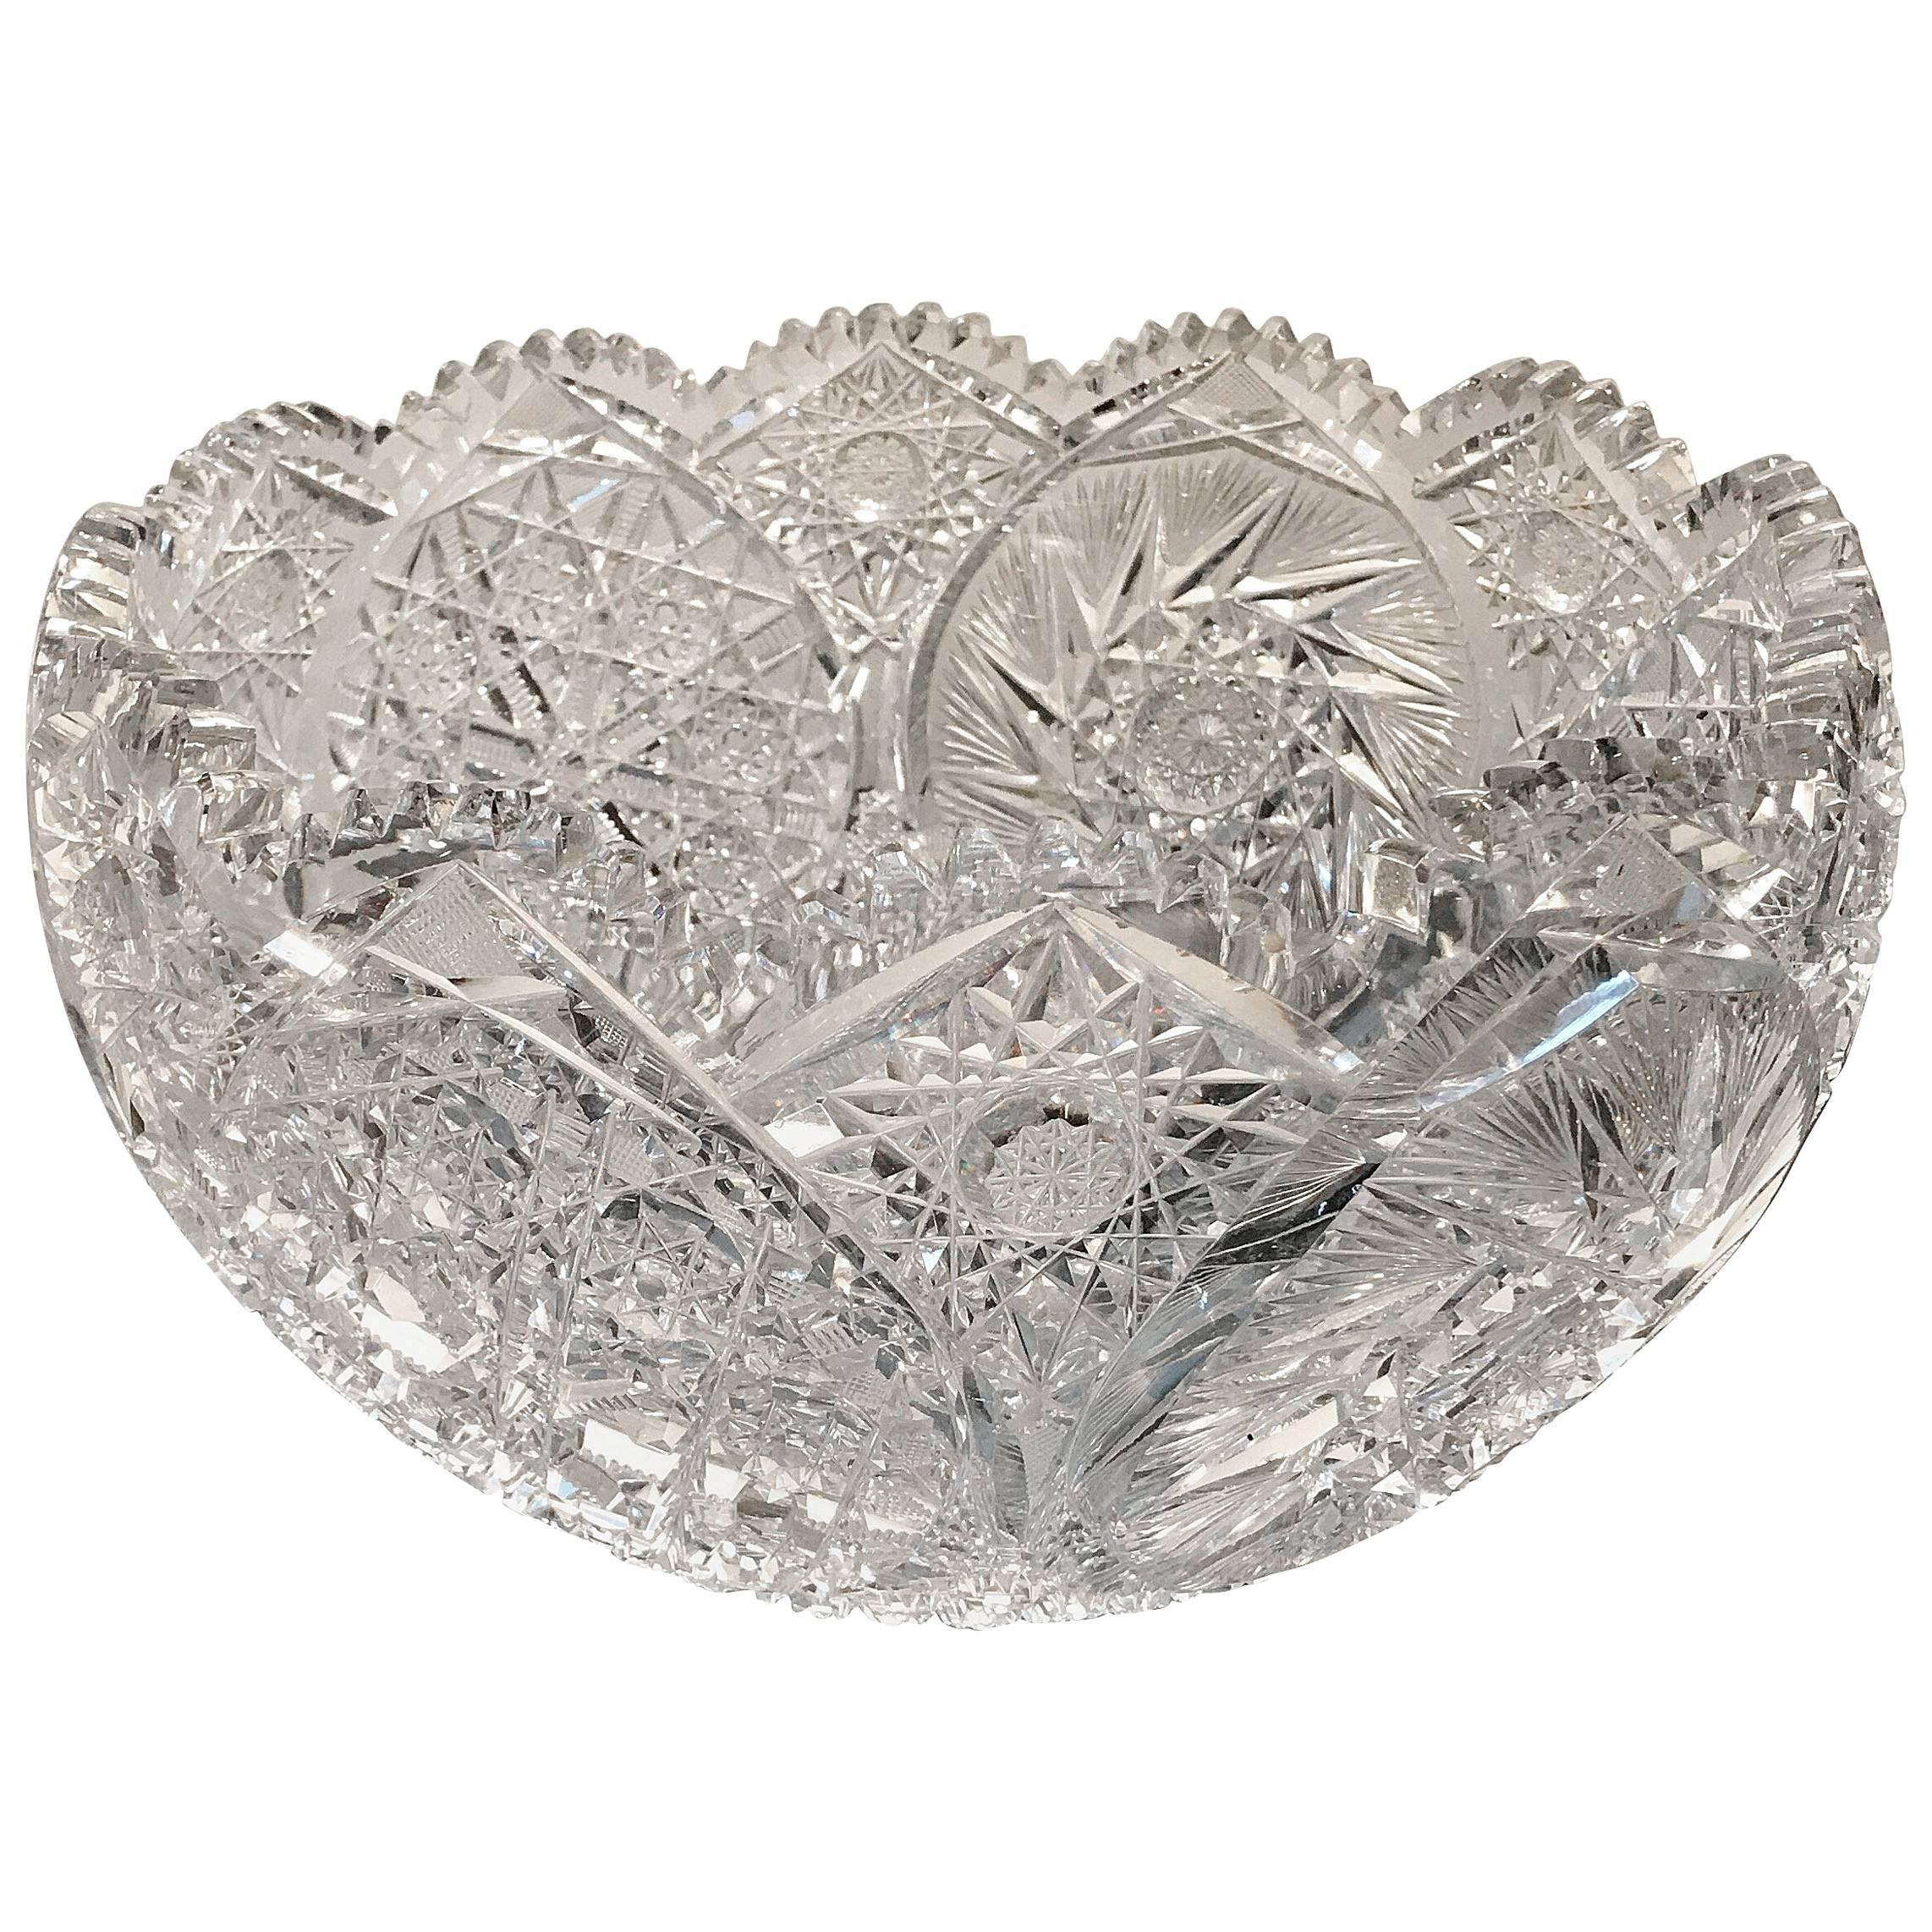 Large Cut Glass Punch Bowl, 19th Century